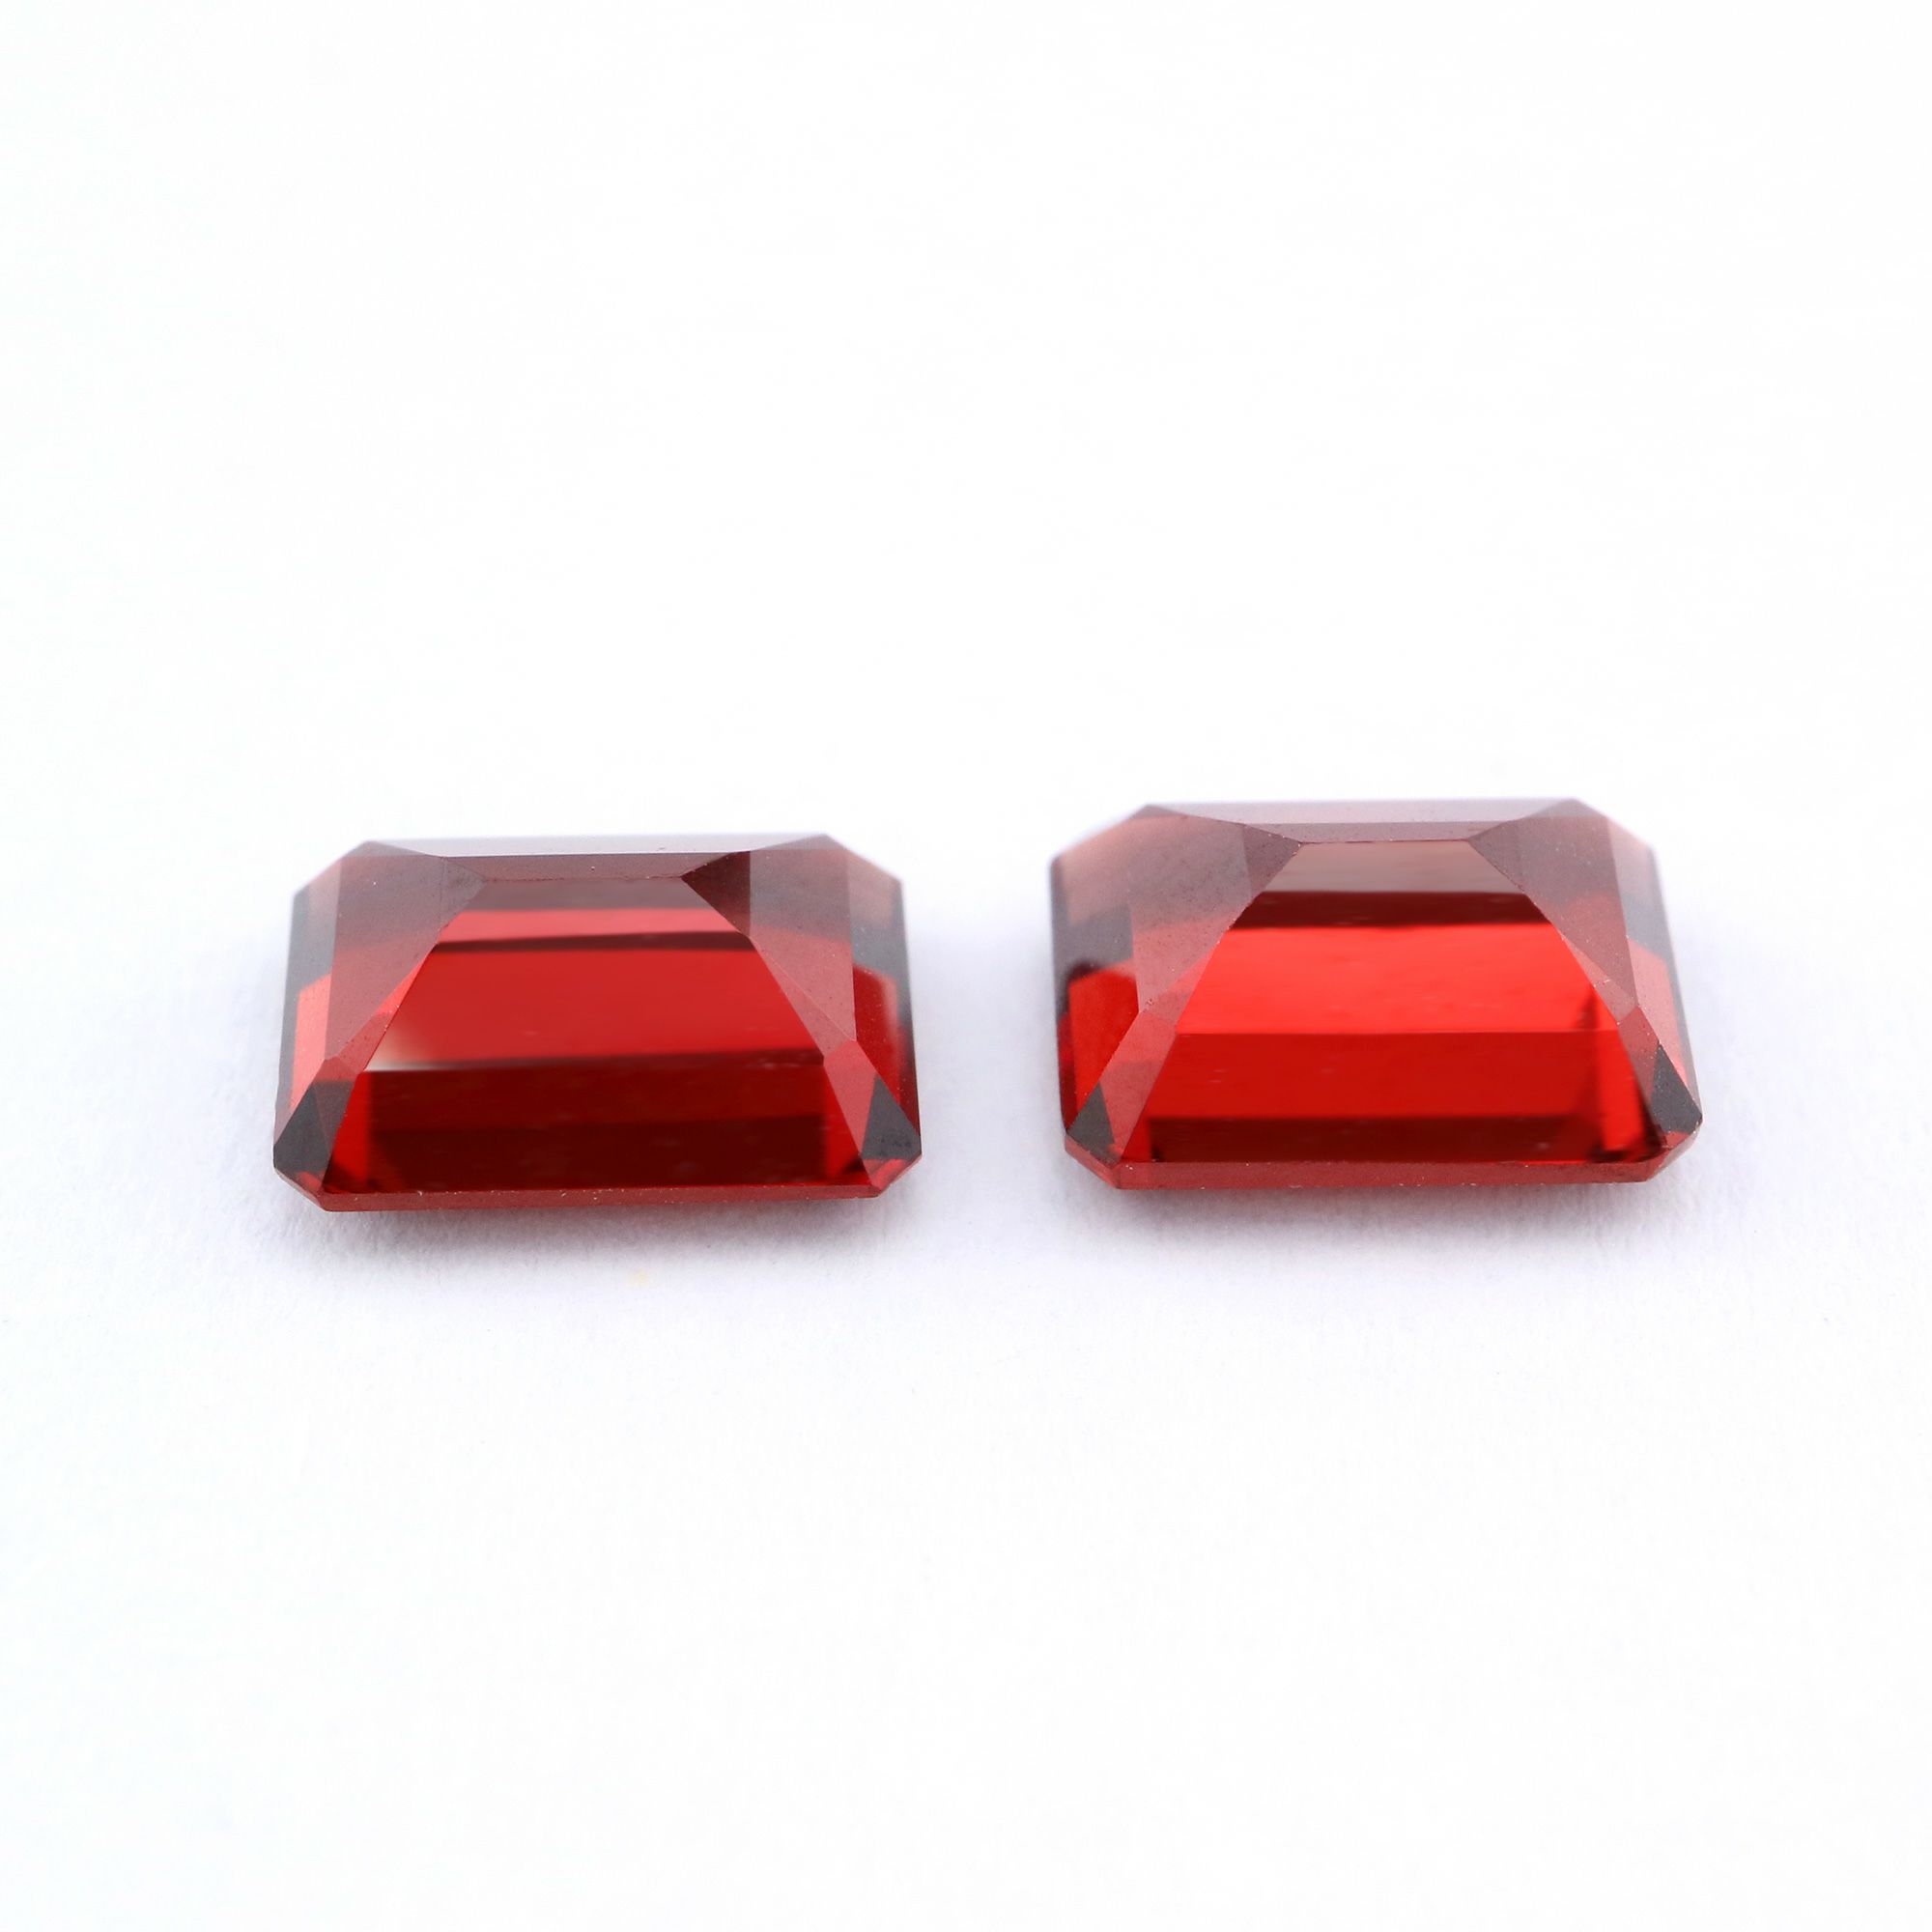 1Pcs Natural Red Garnet January Birthstone Emerald Cut Faceted Loose Gemstone Nature Semi Precious Stone DIY Jewelry Supplies 4170008 - Click Image to Close